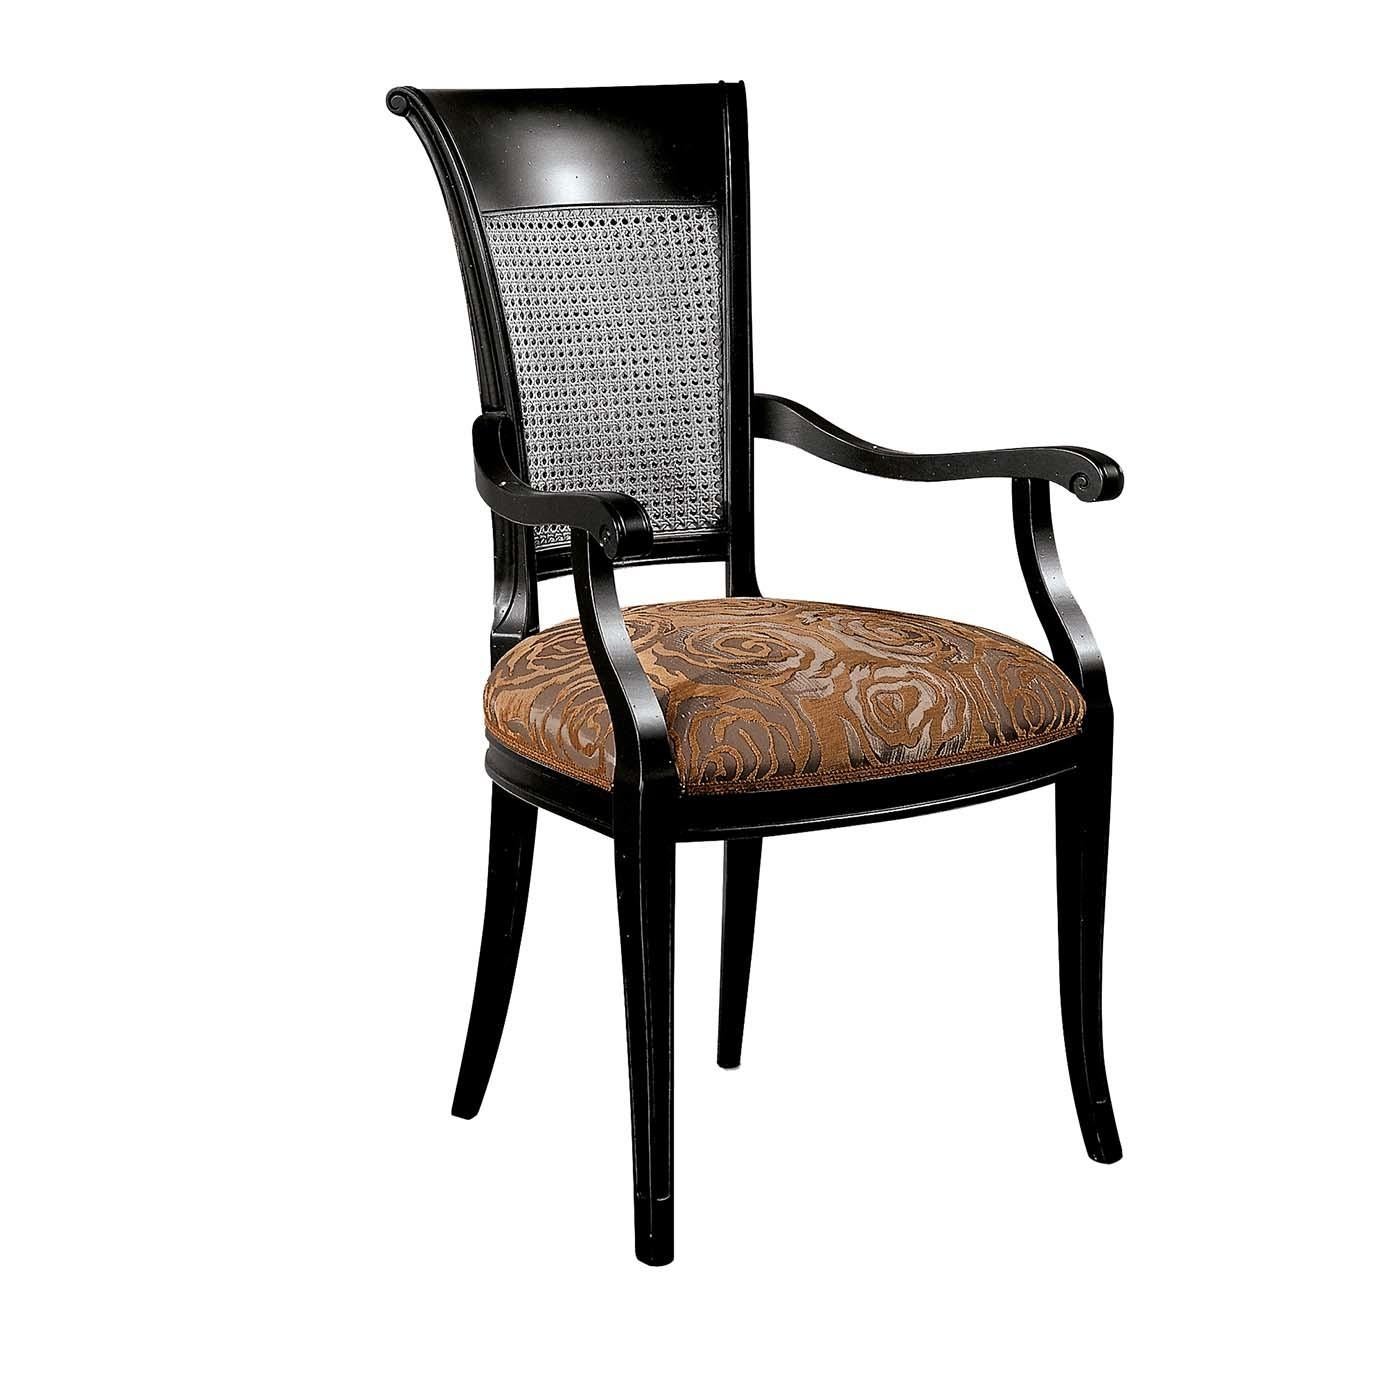 Italian Capotavola Viennese Cane Chair with Armrests